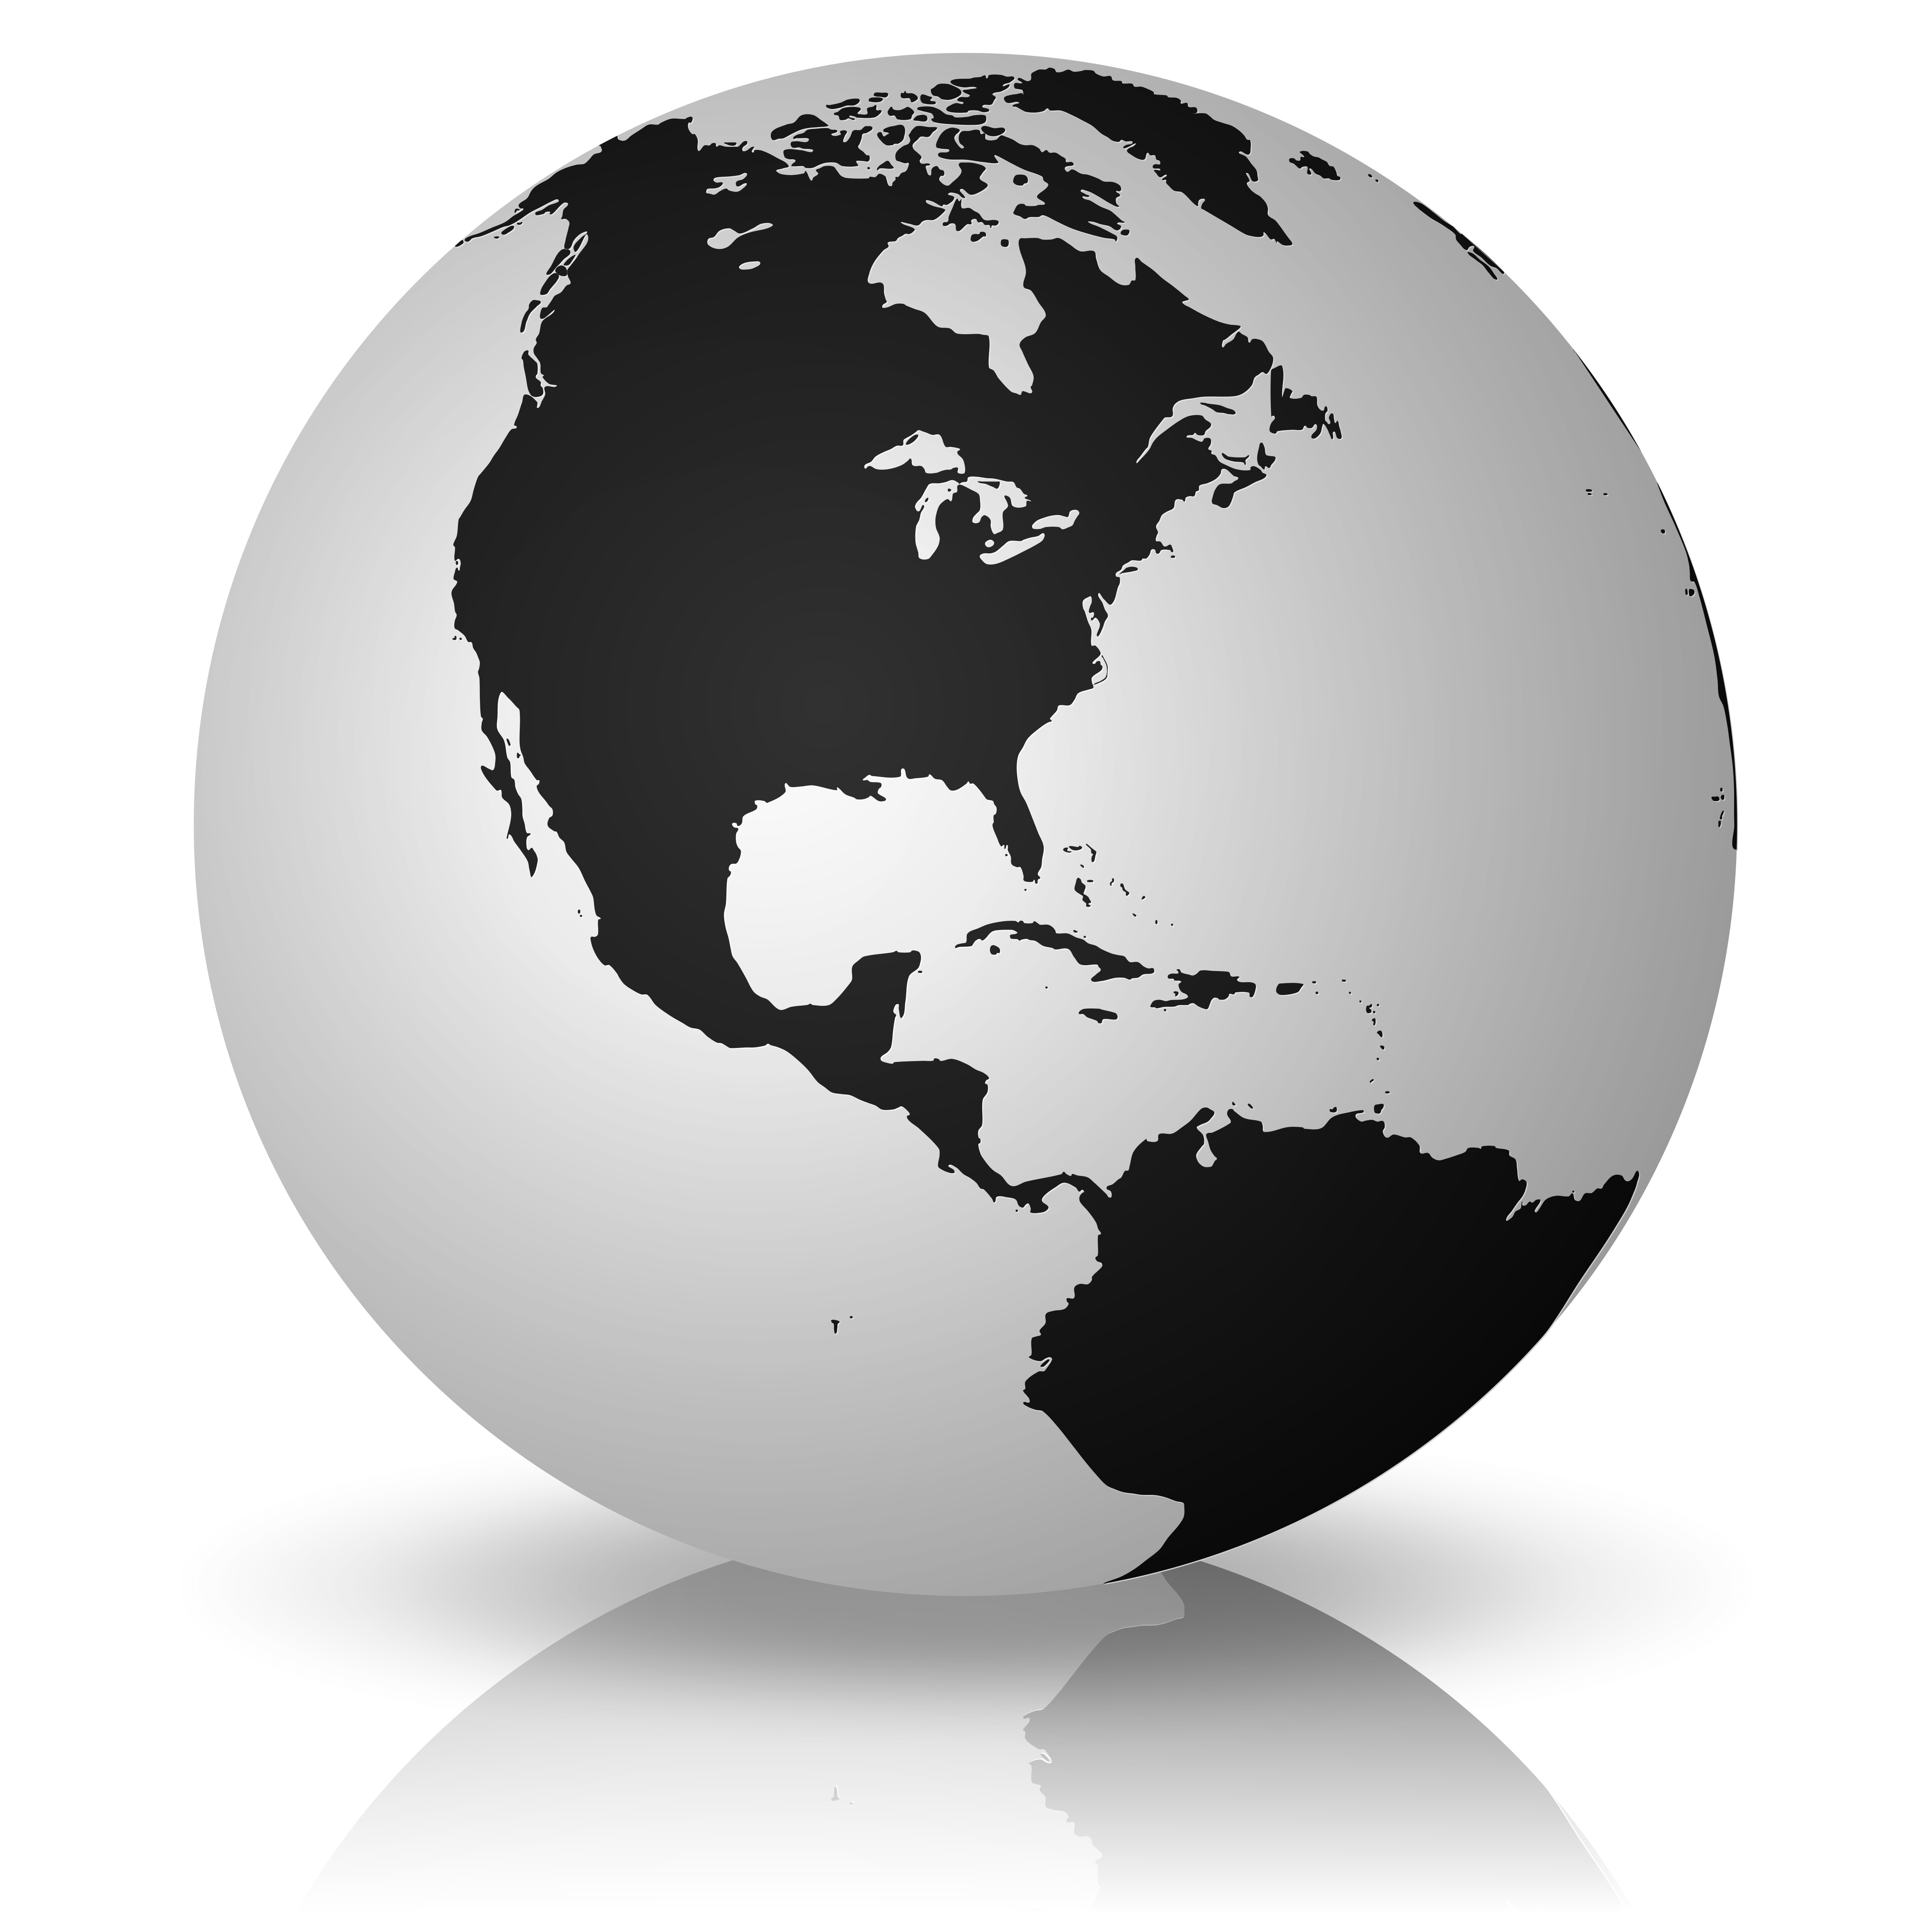 America clipart earth, America earth Transparent FREE for